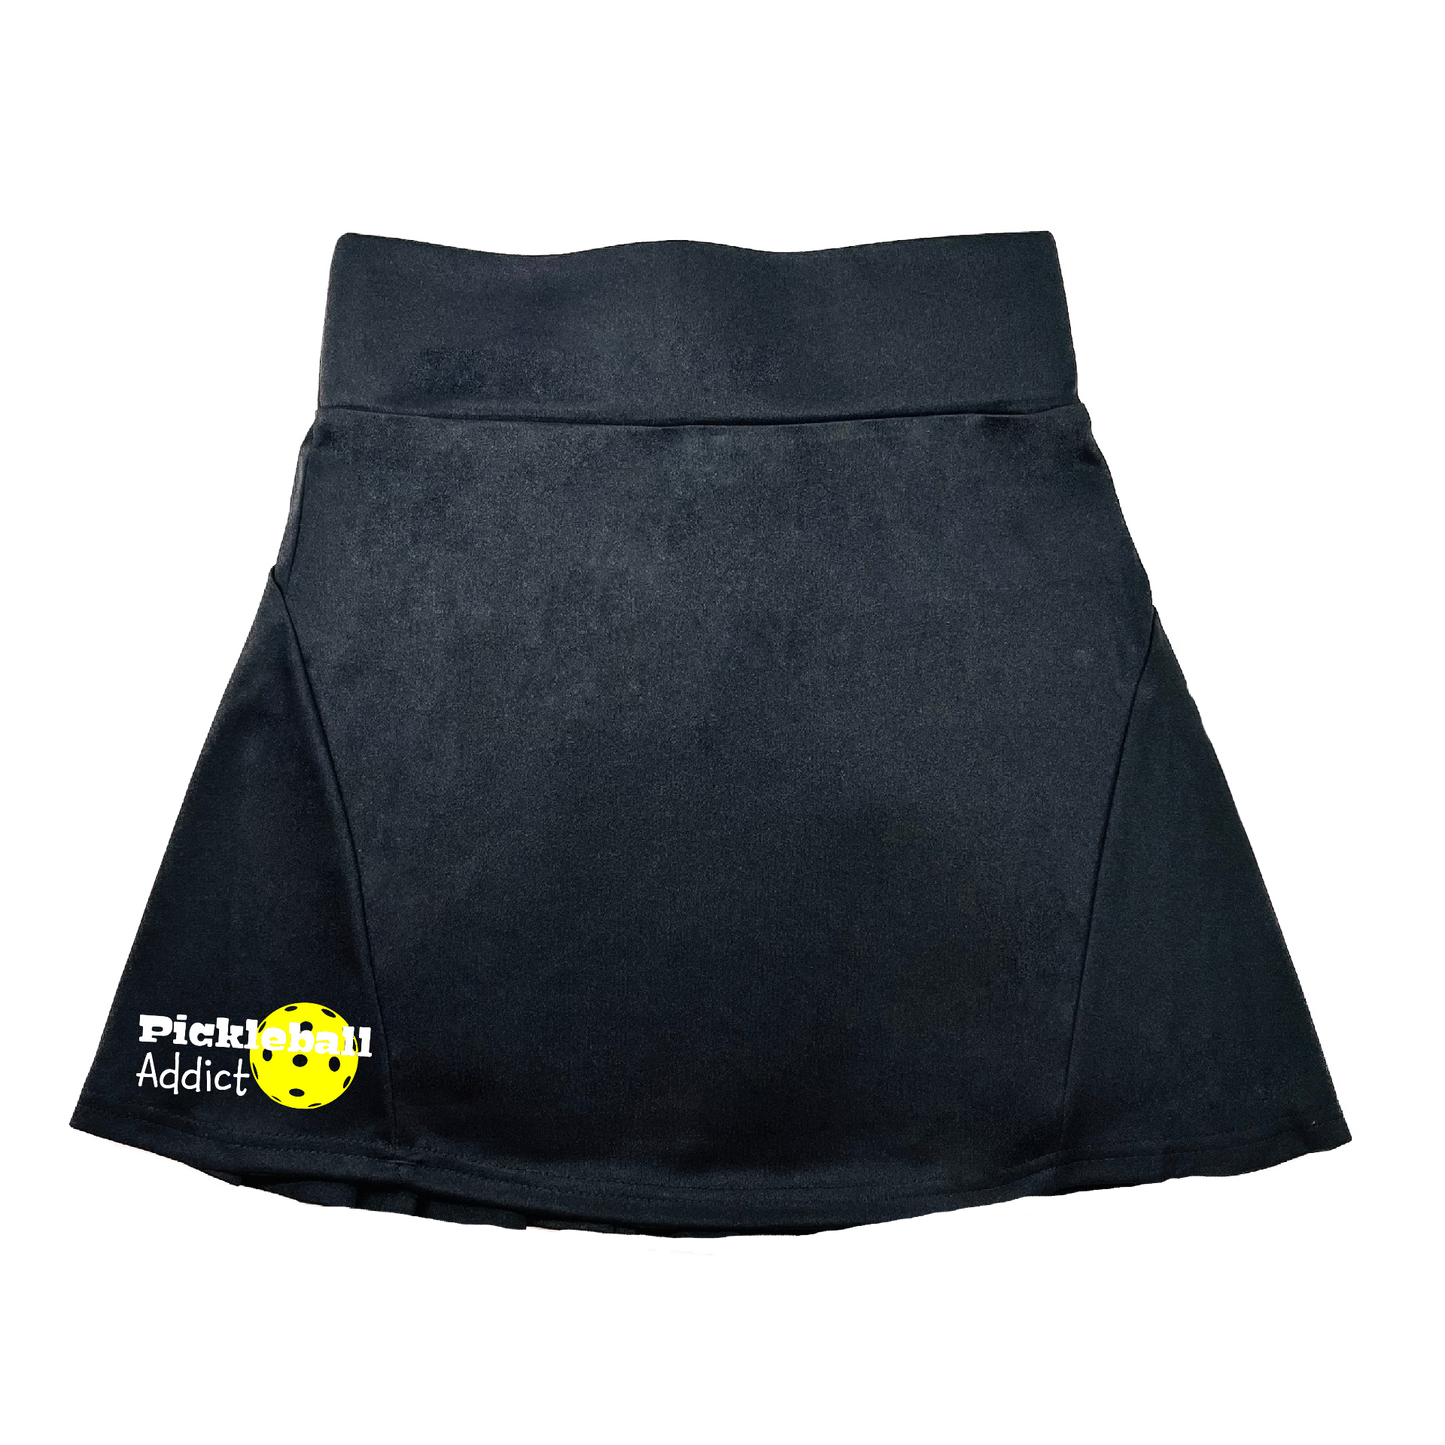 Pickleball Flirty Skort Design:  Pickleball Addict  These flirty skorts have a flat mid-rise waistband with a 3 inch waistband.  Light weight without being see through and the material wicks away moisture quickly.  Flirty pleats in the back with inner shorts for free movement and stylish coverage on the courts.  A functional zipper pocket on the back and two built in pockets on the shorts for convenient storage.